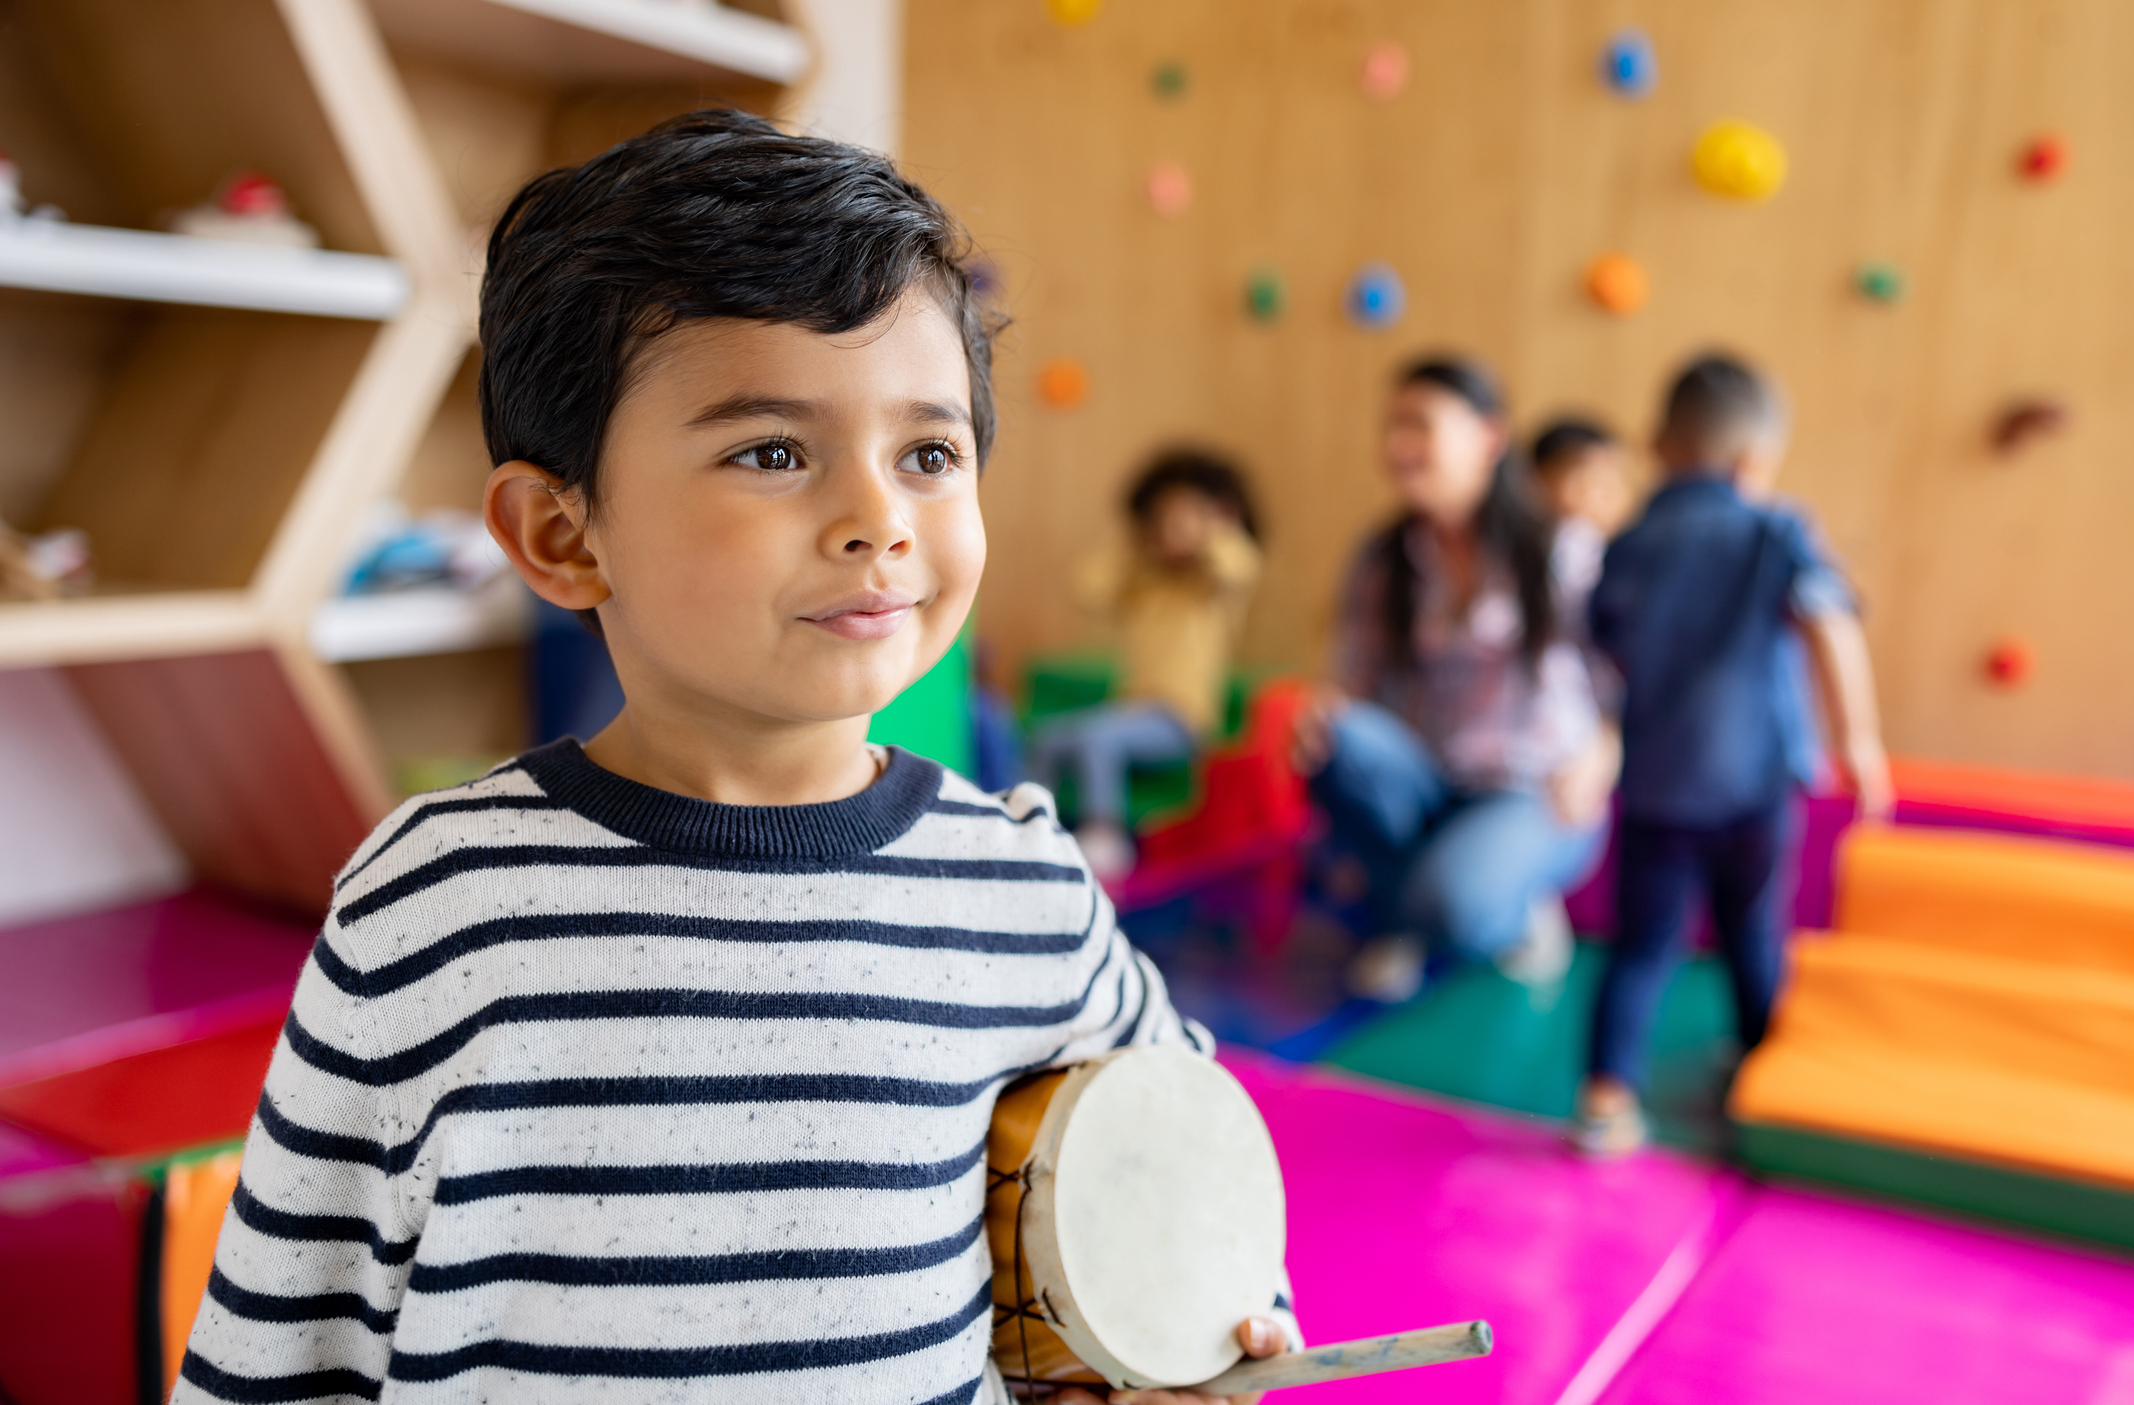 Portrait of a happy Latin American boy in music class at school and smiling - education concepts